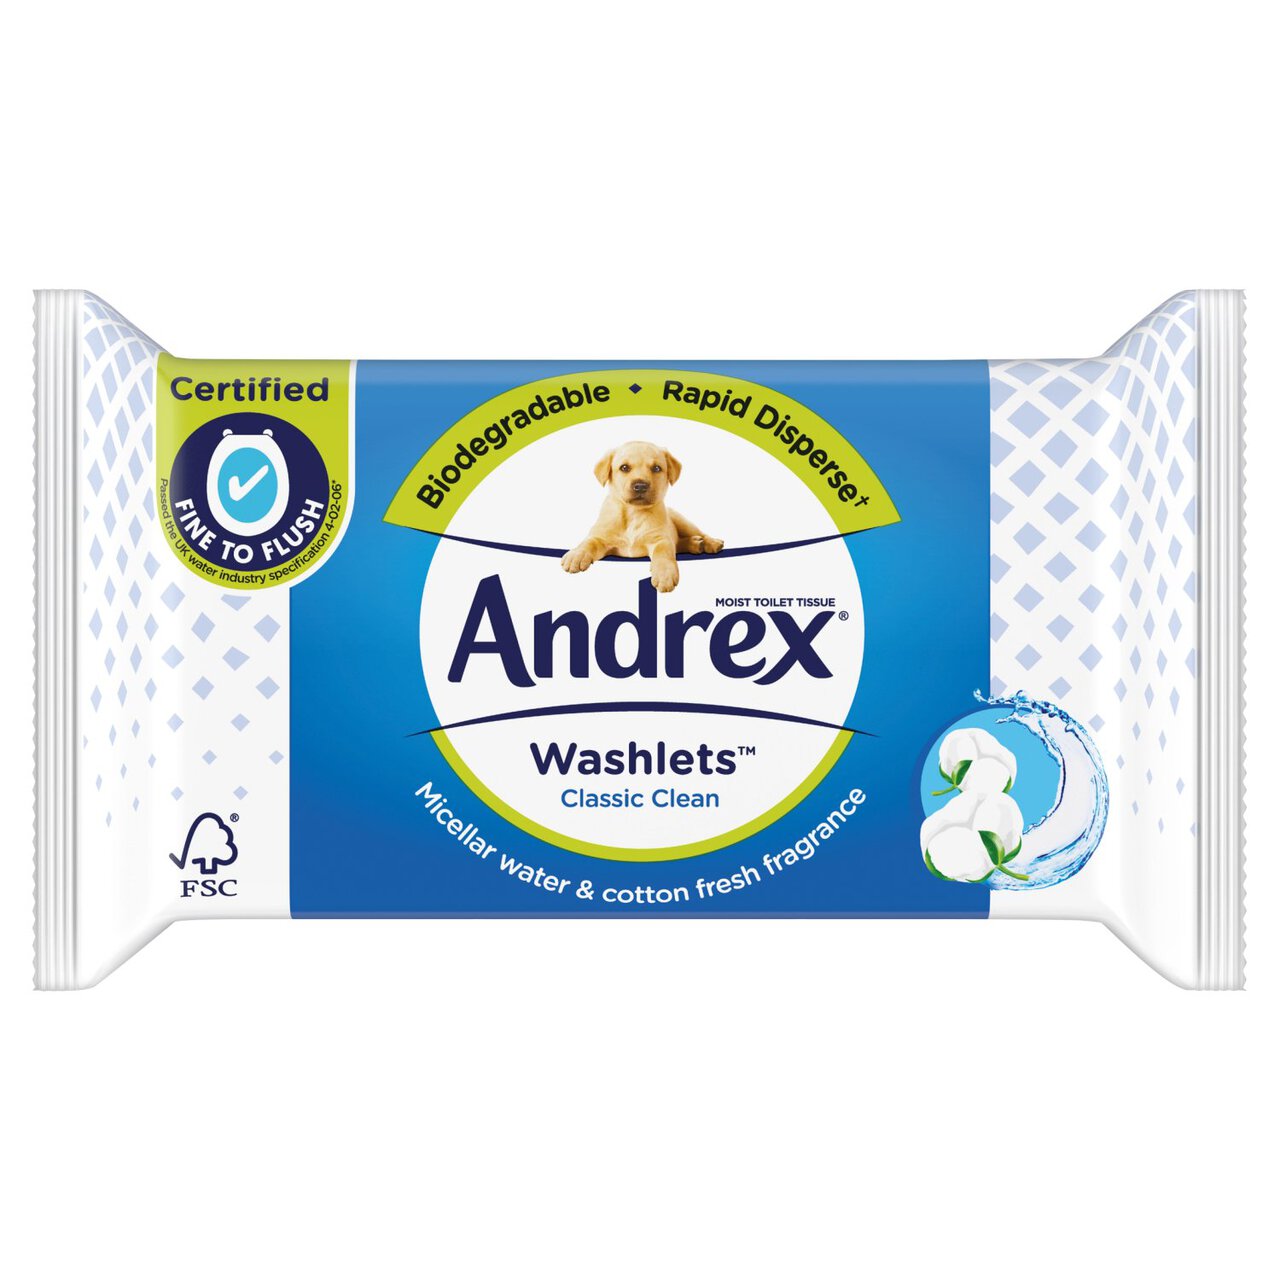 Andrex Classic Clean Washlets 40 per pack